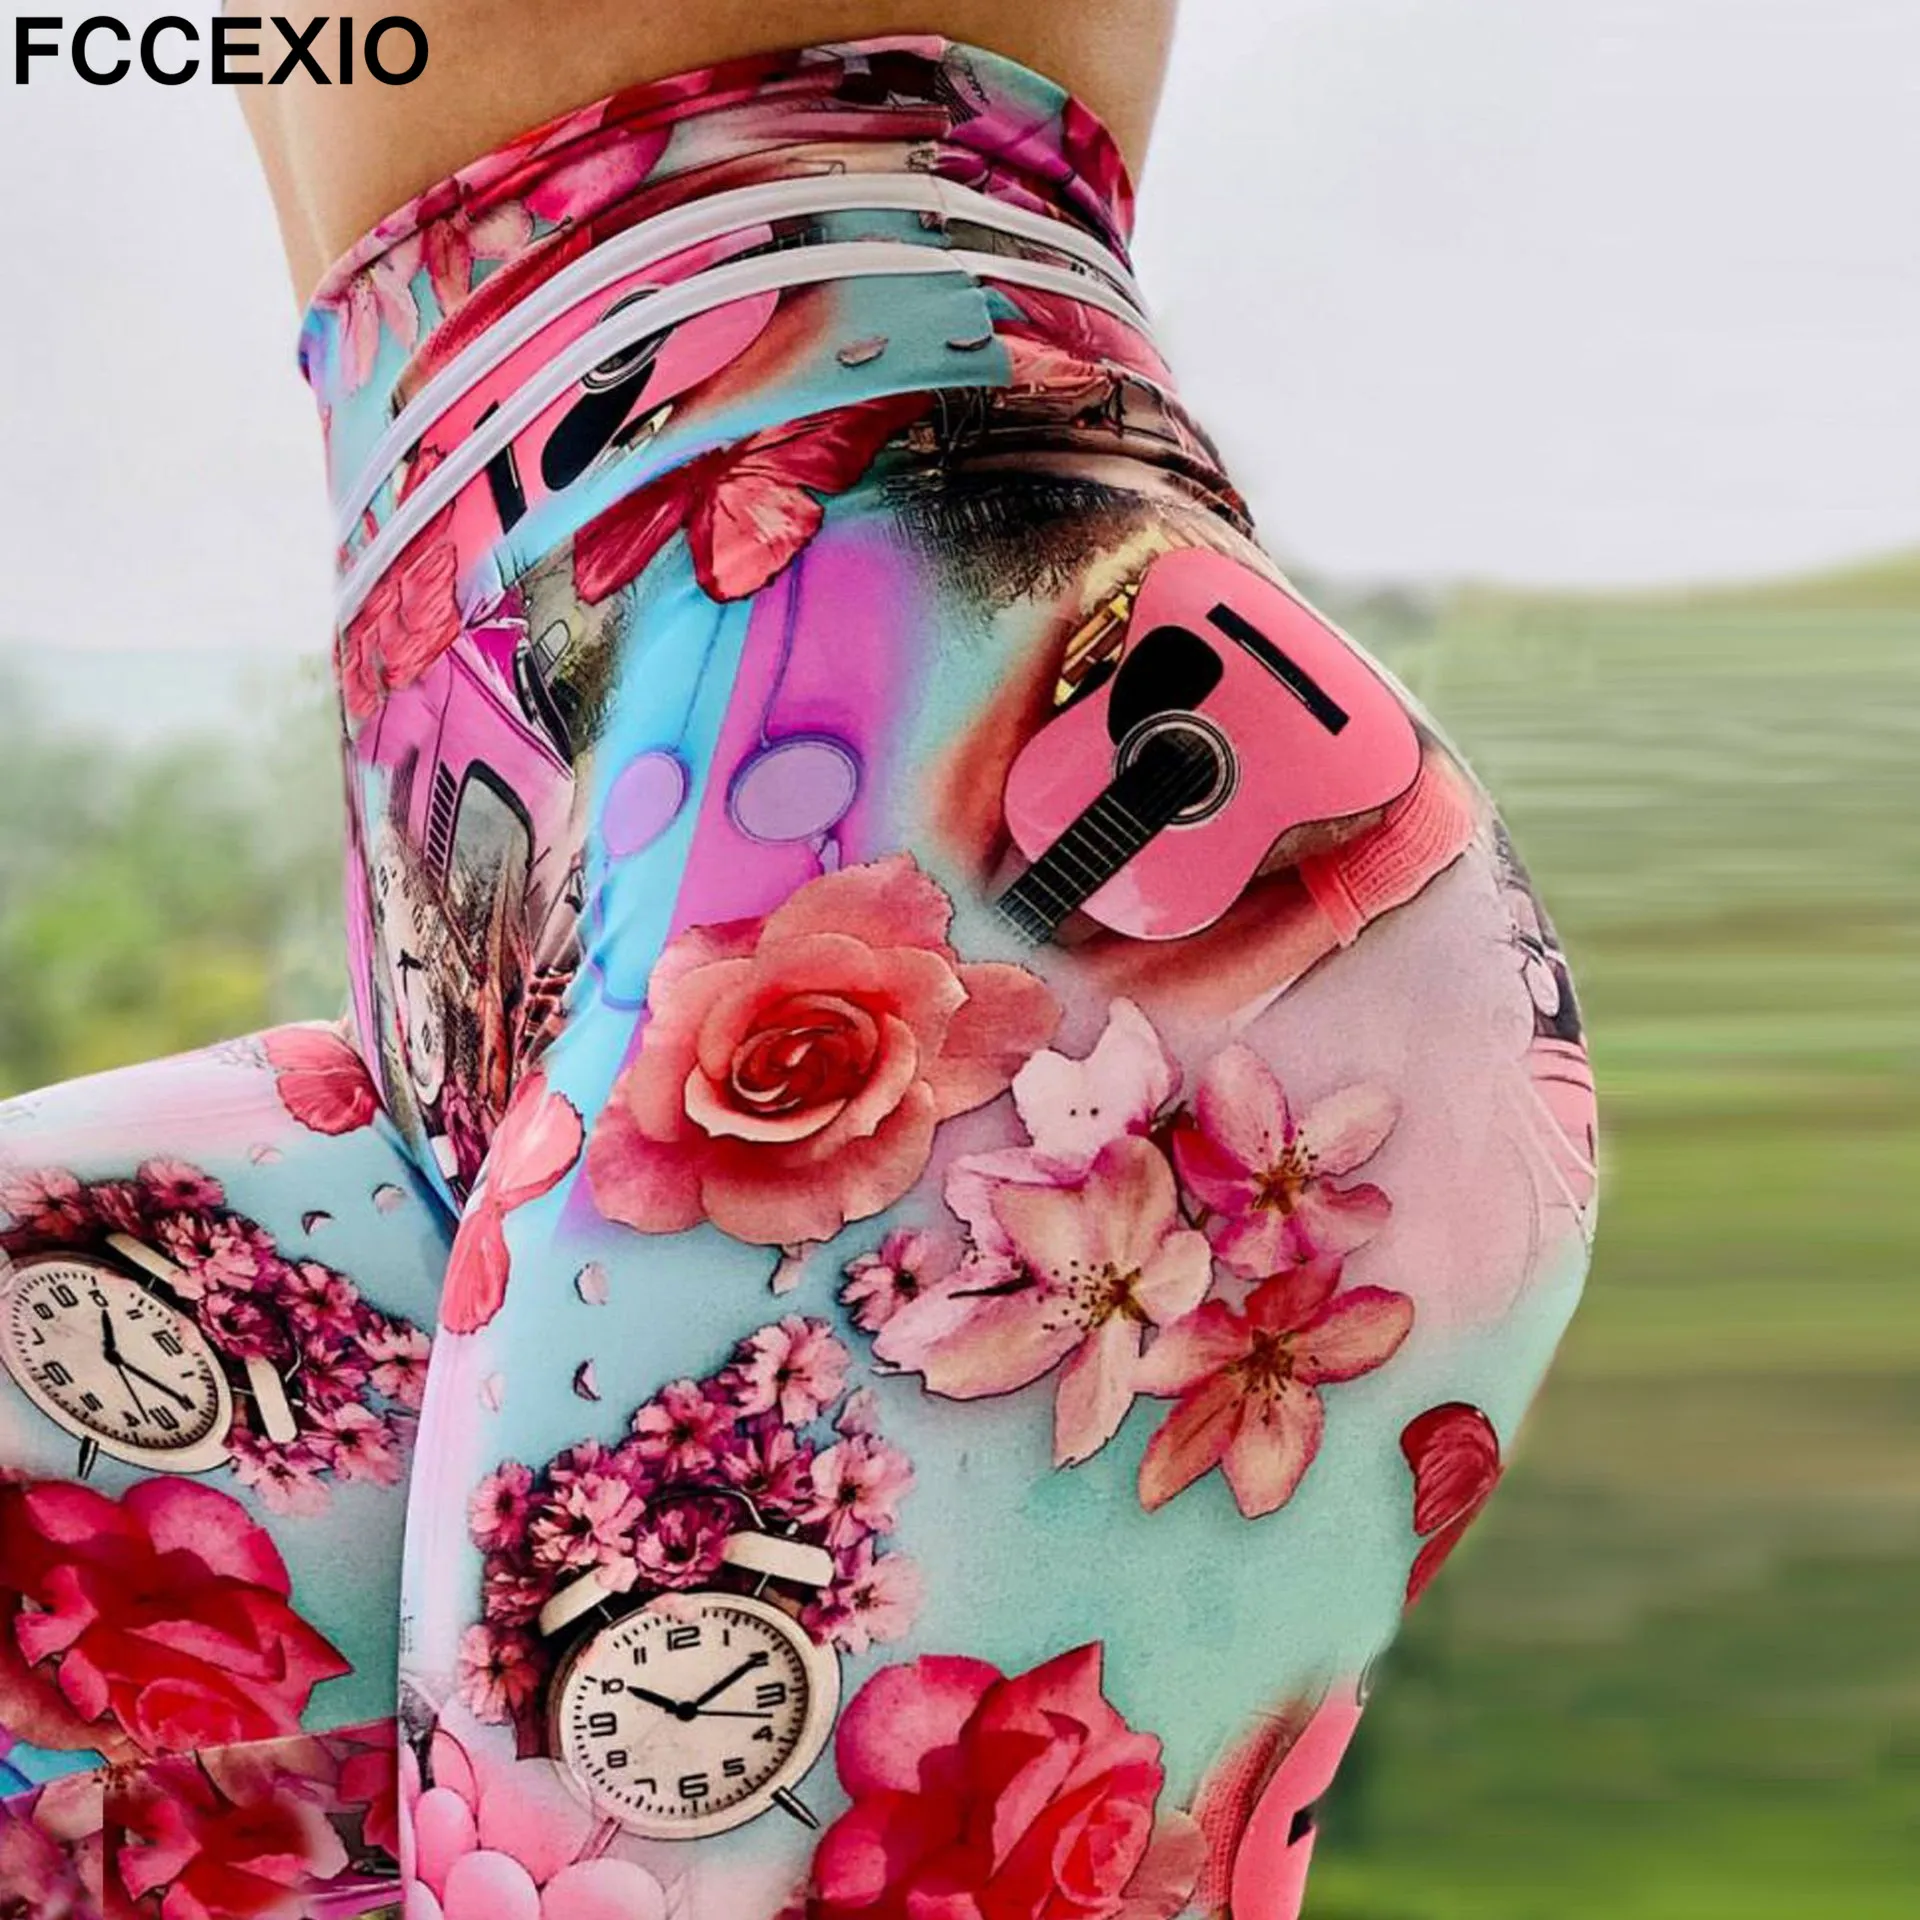 FCCEXIO Women Pink PU Leather Leggings Laser Pencil Pants Push Up High Waist Sexy Skinny  Butt Lifting Workout Fitness Trousers thigh highs